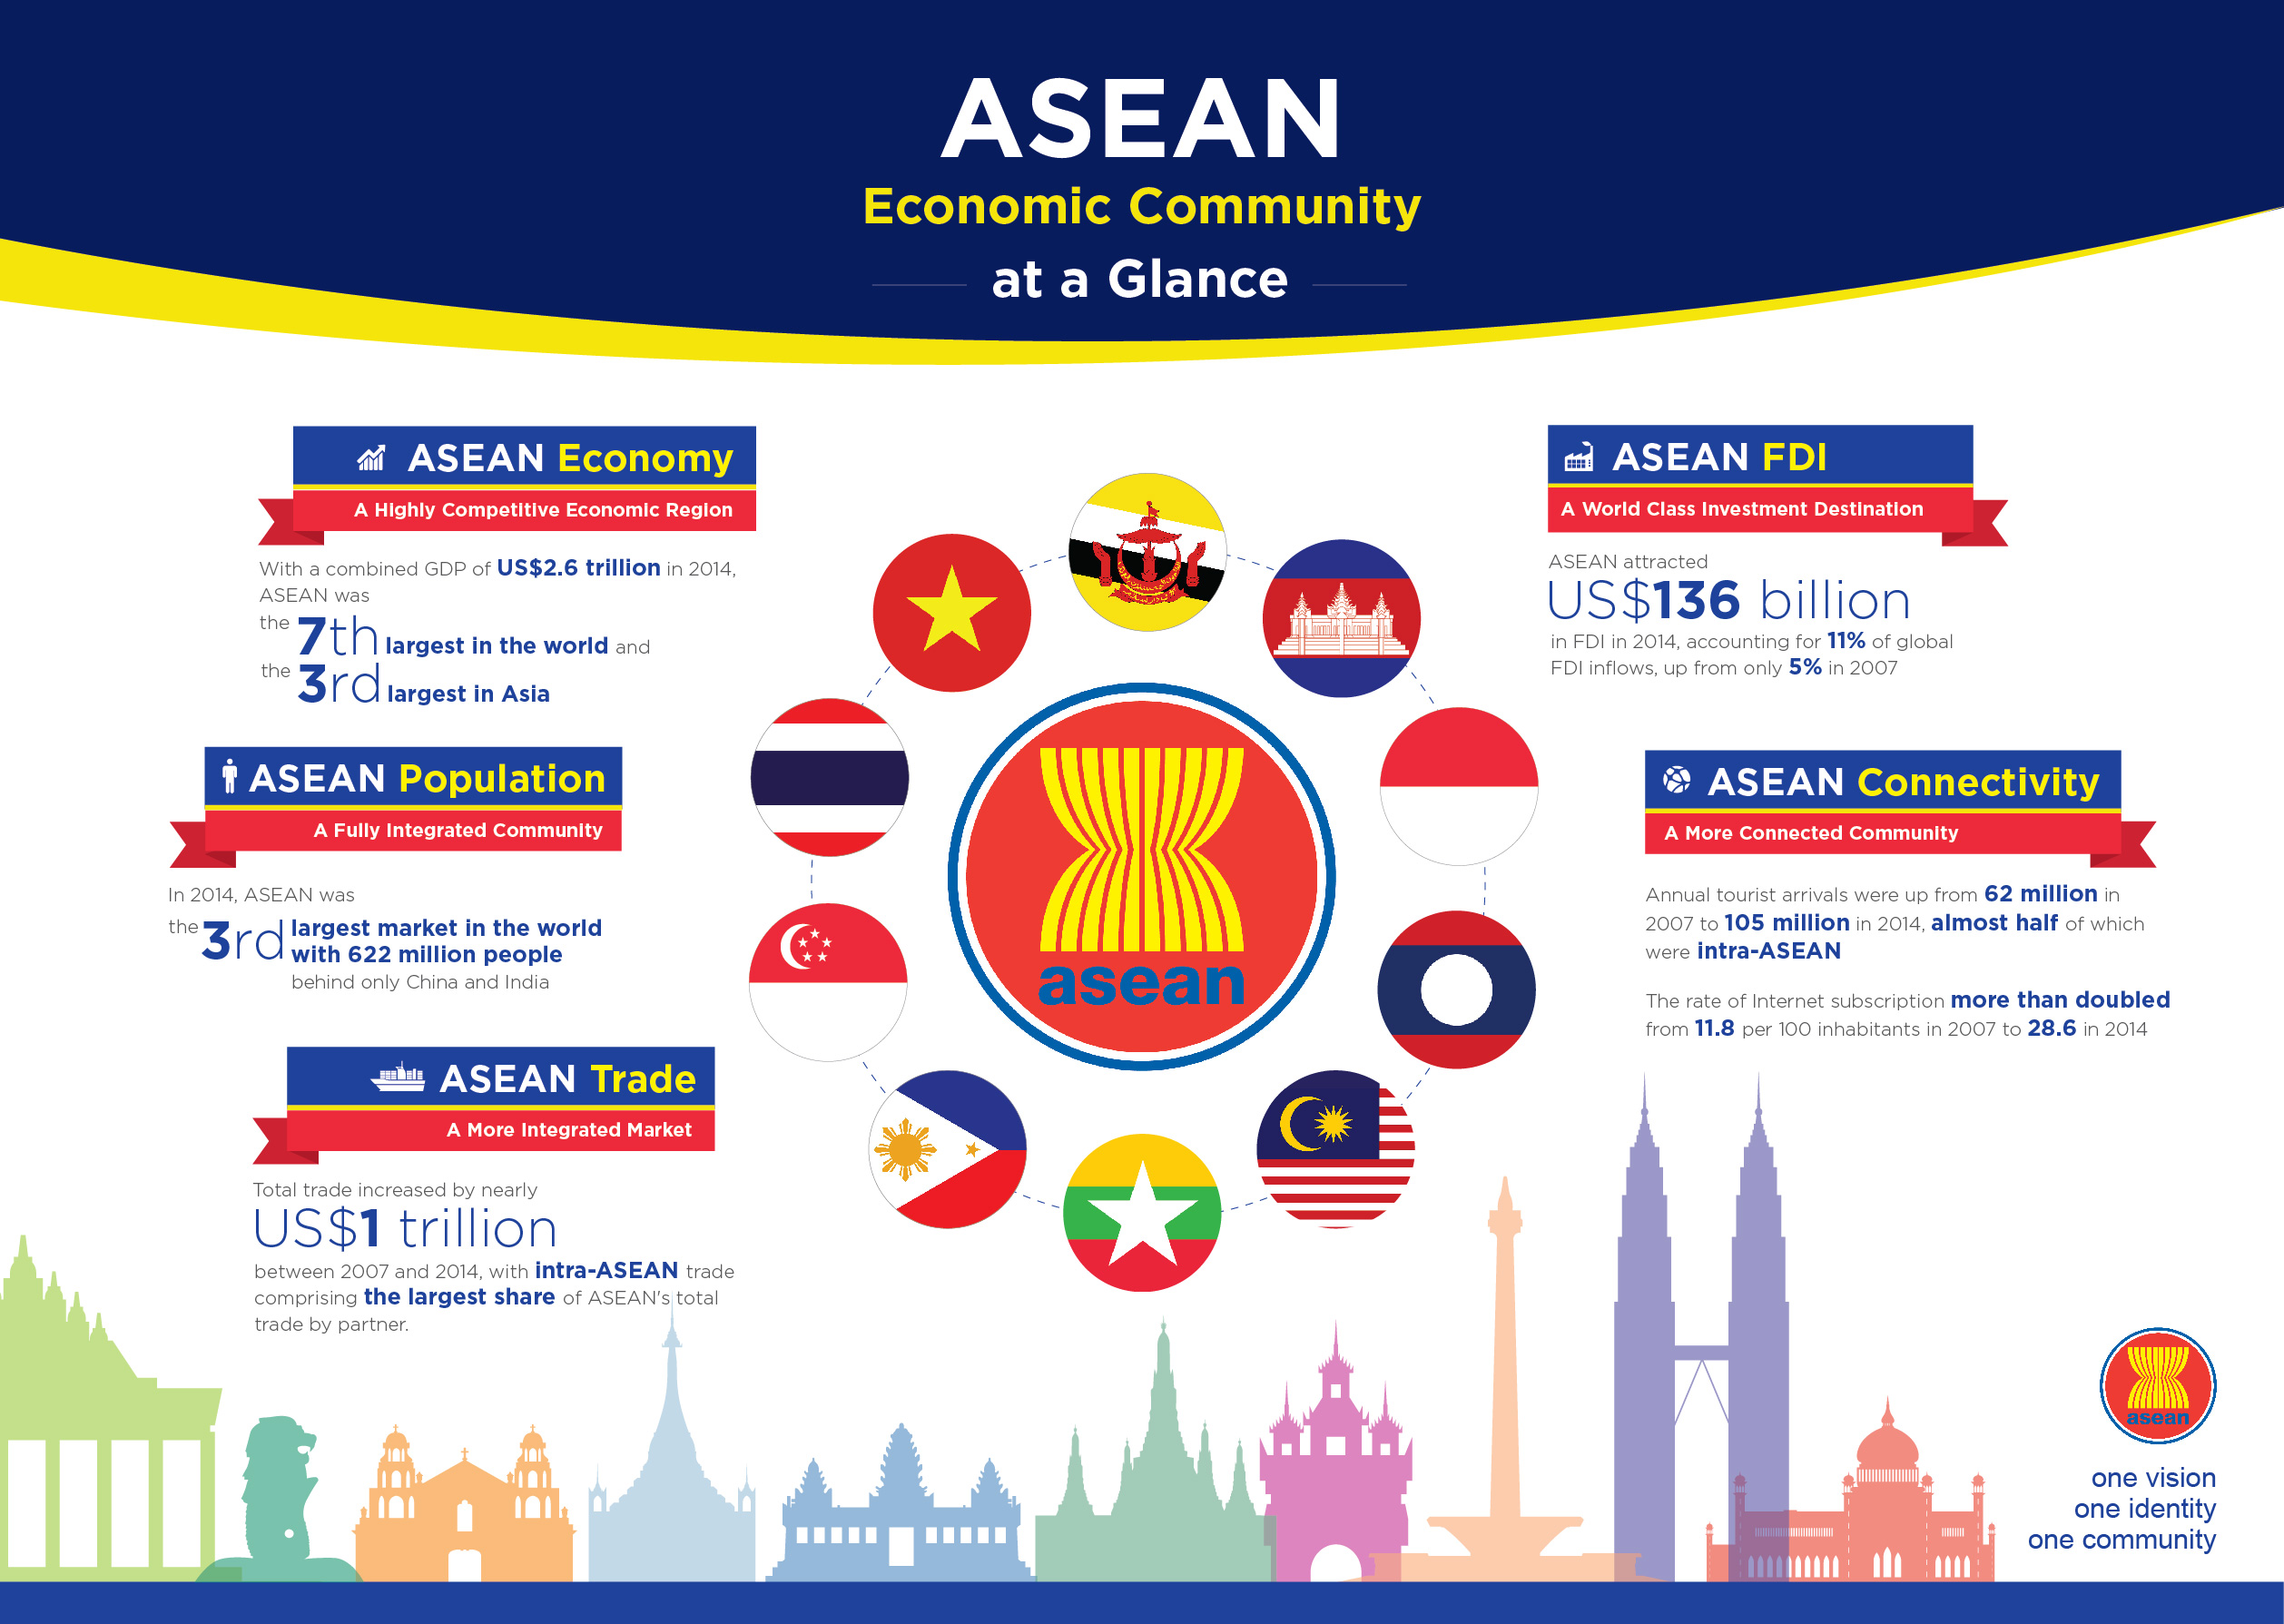 AEC at a Glance Infographic